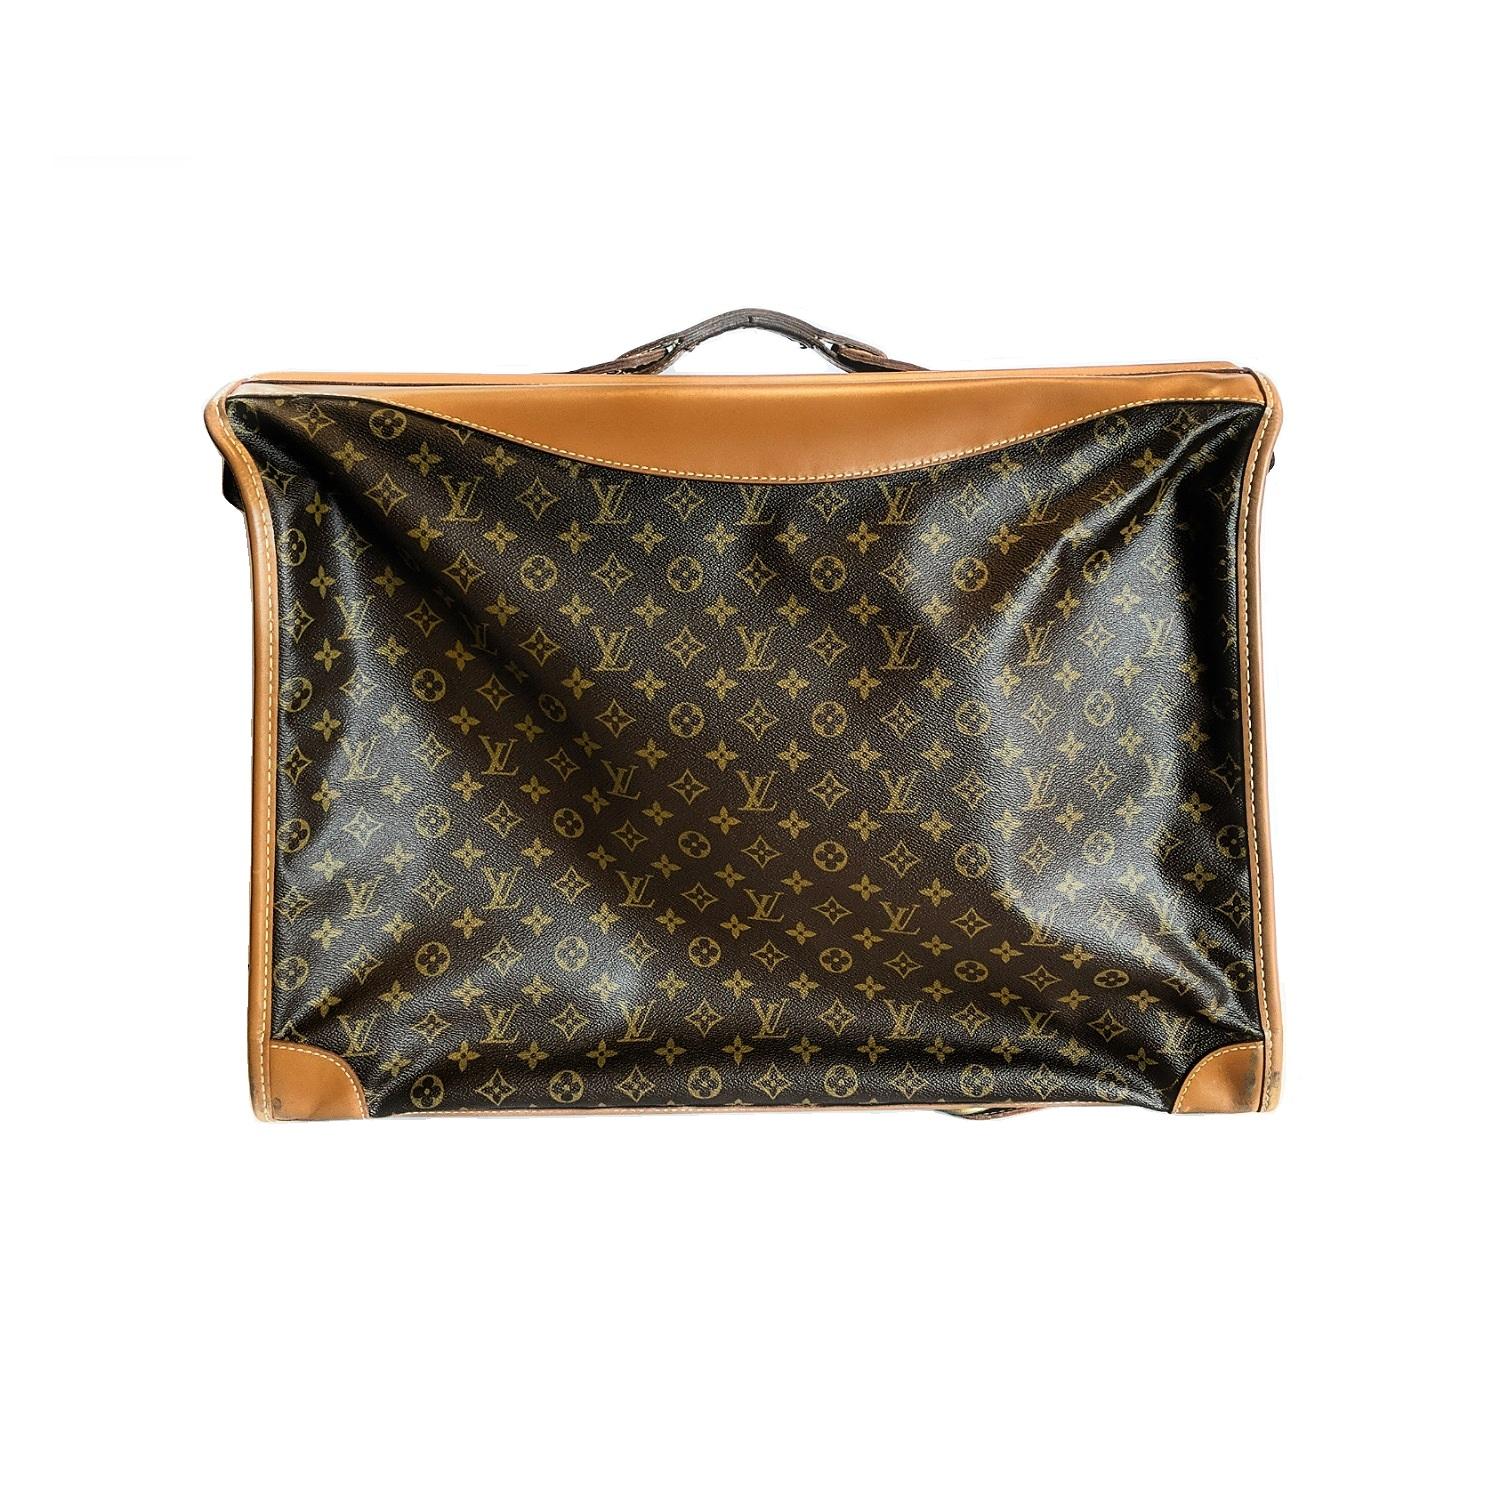 This is a wonderful classic garment bag from Louis Vuitton that is finely crafted of traditional Louis Vuitton monogram on toile canvas. This carrier features complimentary saddle leather trim and a sturdy reinforced top handle, corduroy lined lower